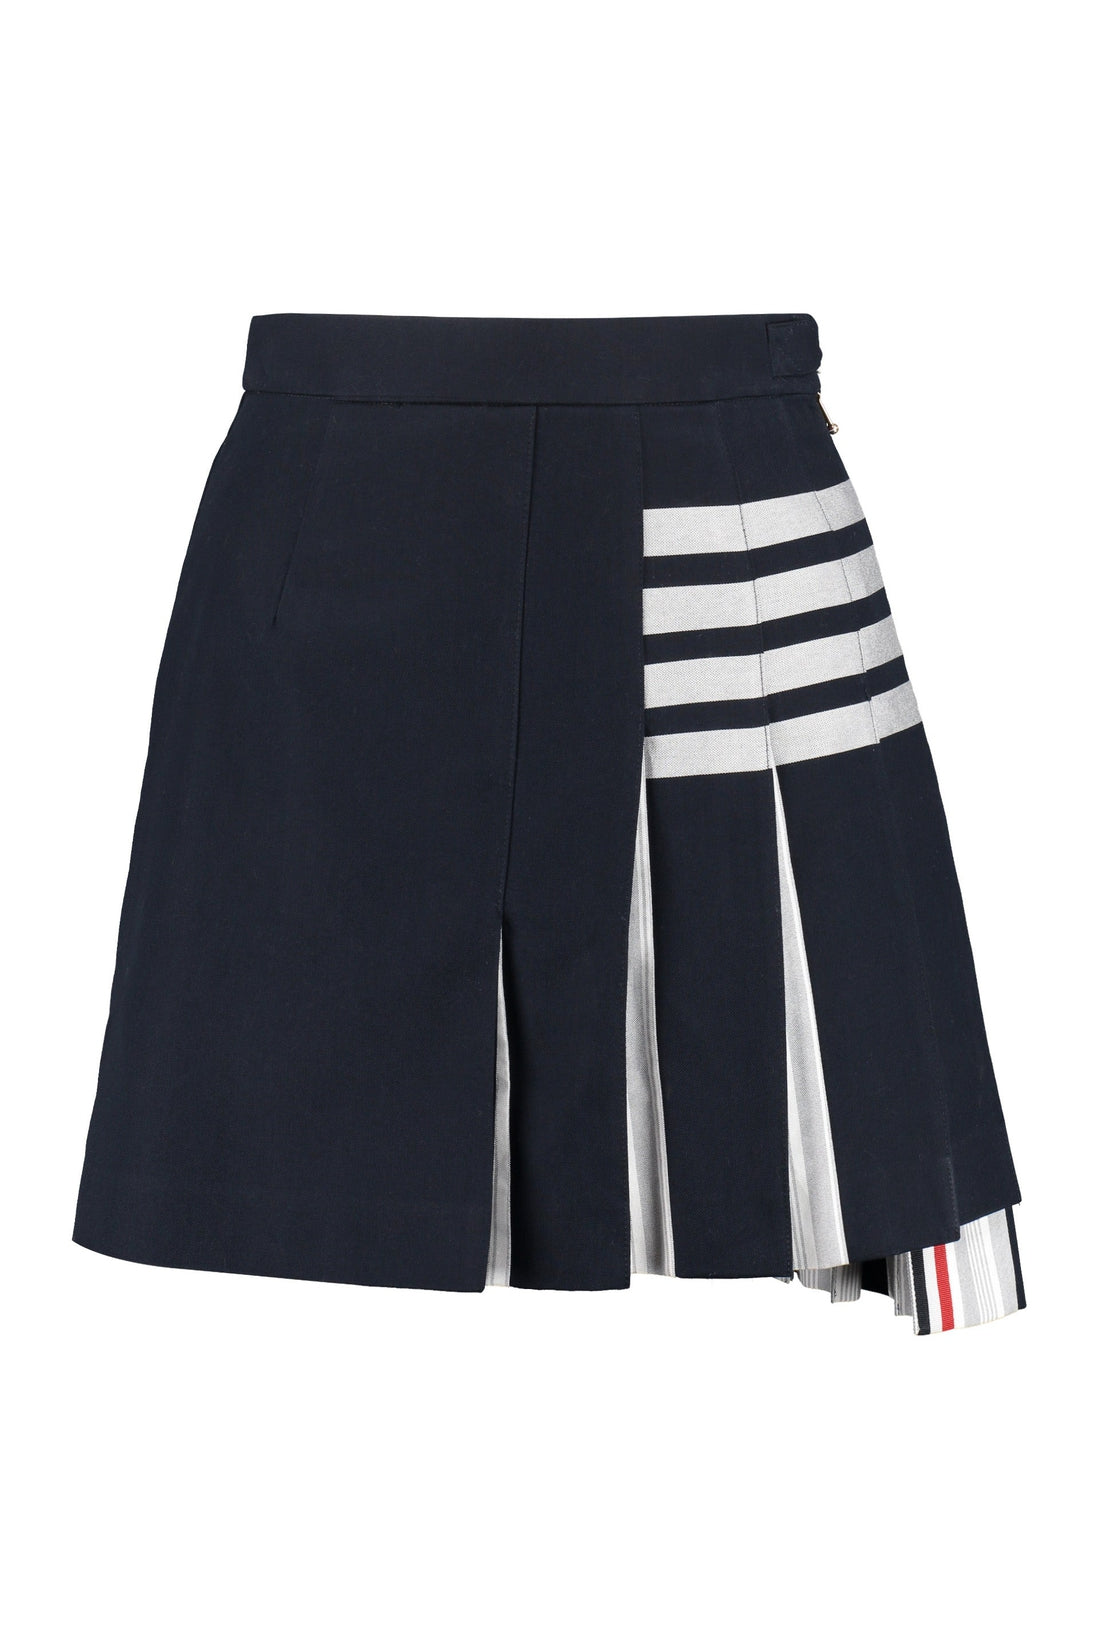 Thom Browne-OUTLET-SALE-Pleated cotton skirt-ARCHIVIST